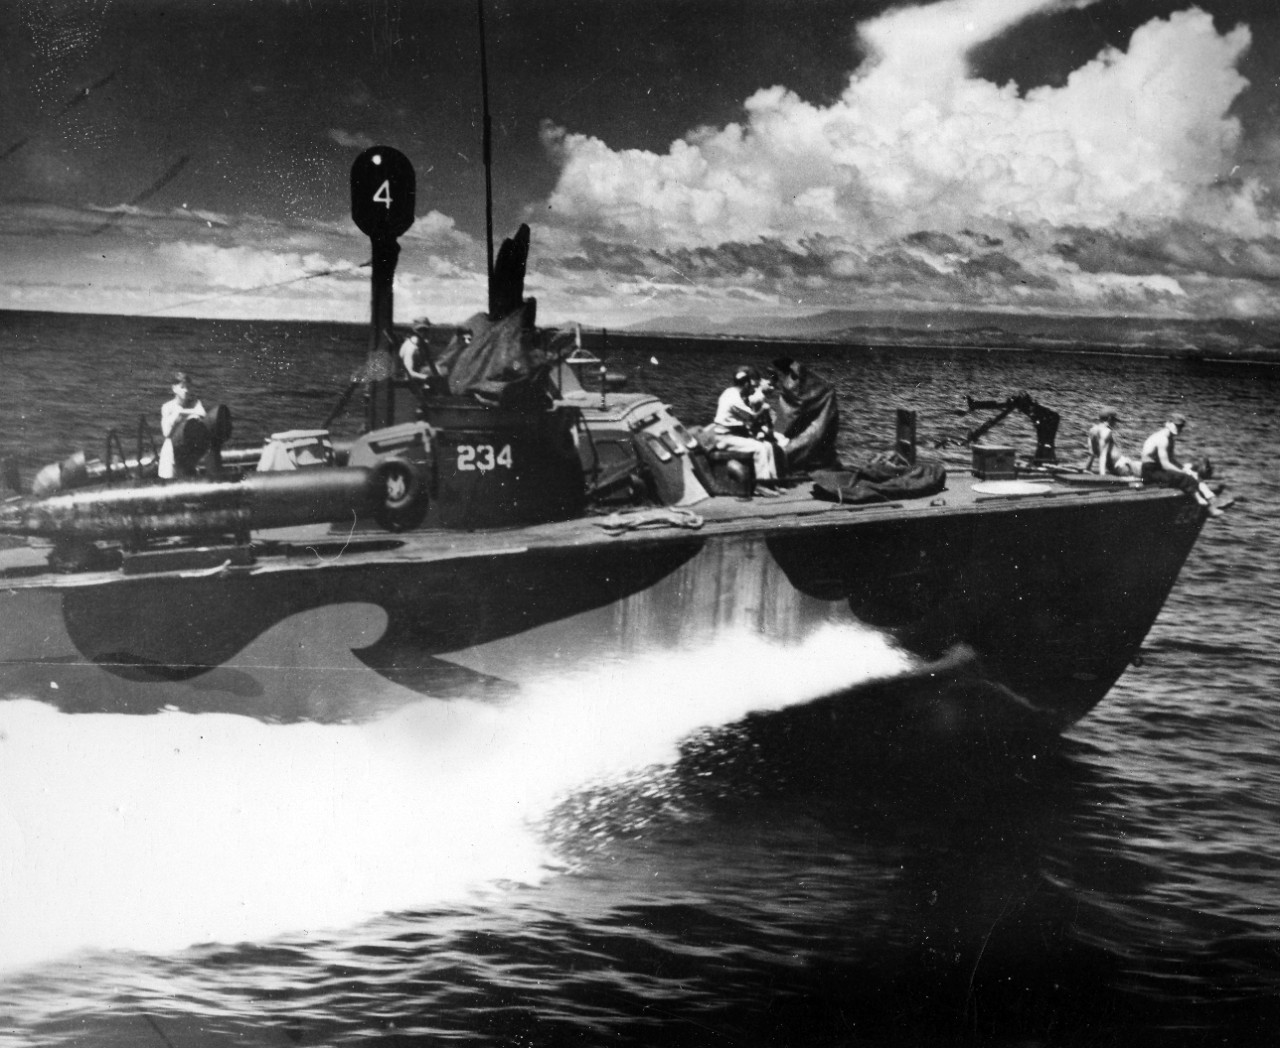 Collection of 50 photos related to the naval career of LT Stafford Wallace, Jr., during WWII in the Pacific Theater. The collection is mostly made up of PT boats (Wallace was a PT boat skipper). The following ships are included in the images: PT-234, PT-589, PT-245, PT-238, PT-228, PT- 594, PT-595, PT-596, PT-589, PT-590, PT-591, as well as several unidentified ships. Most of the photographs show the ships in “action” conducting maneuvers, though no locations are noted. Also included in the collection are views of Leyte (village and buildings) and Salamogue Harbor in Luzon, Philippines (showing a view of a sunken Japanese destroyer). There is a single image of USS Charles R. Ware (DD-865) and the motor launch of USS Franklin D. Roosevelt (CV-42). 